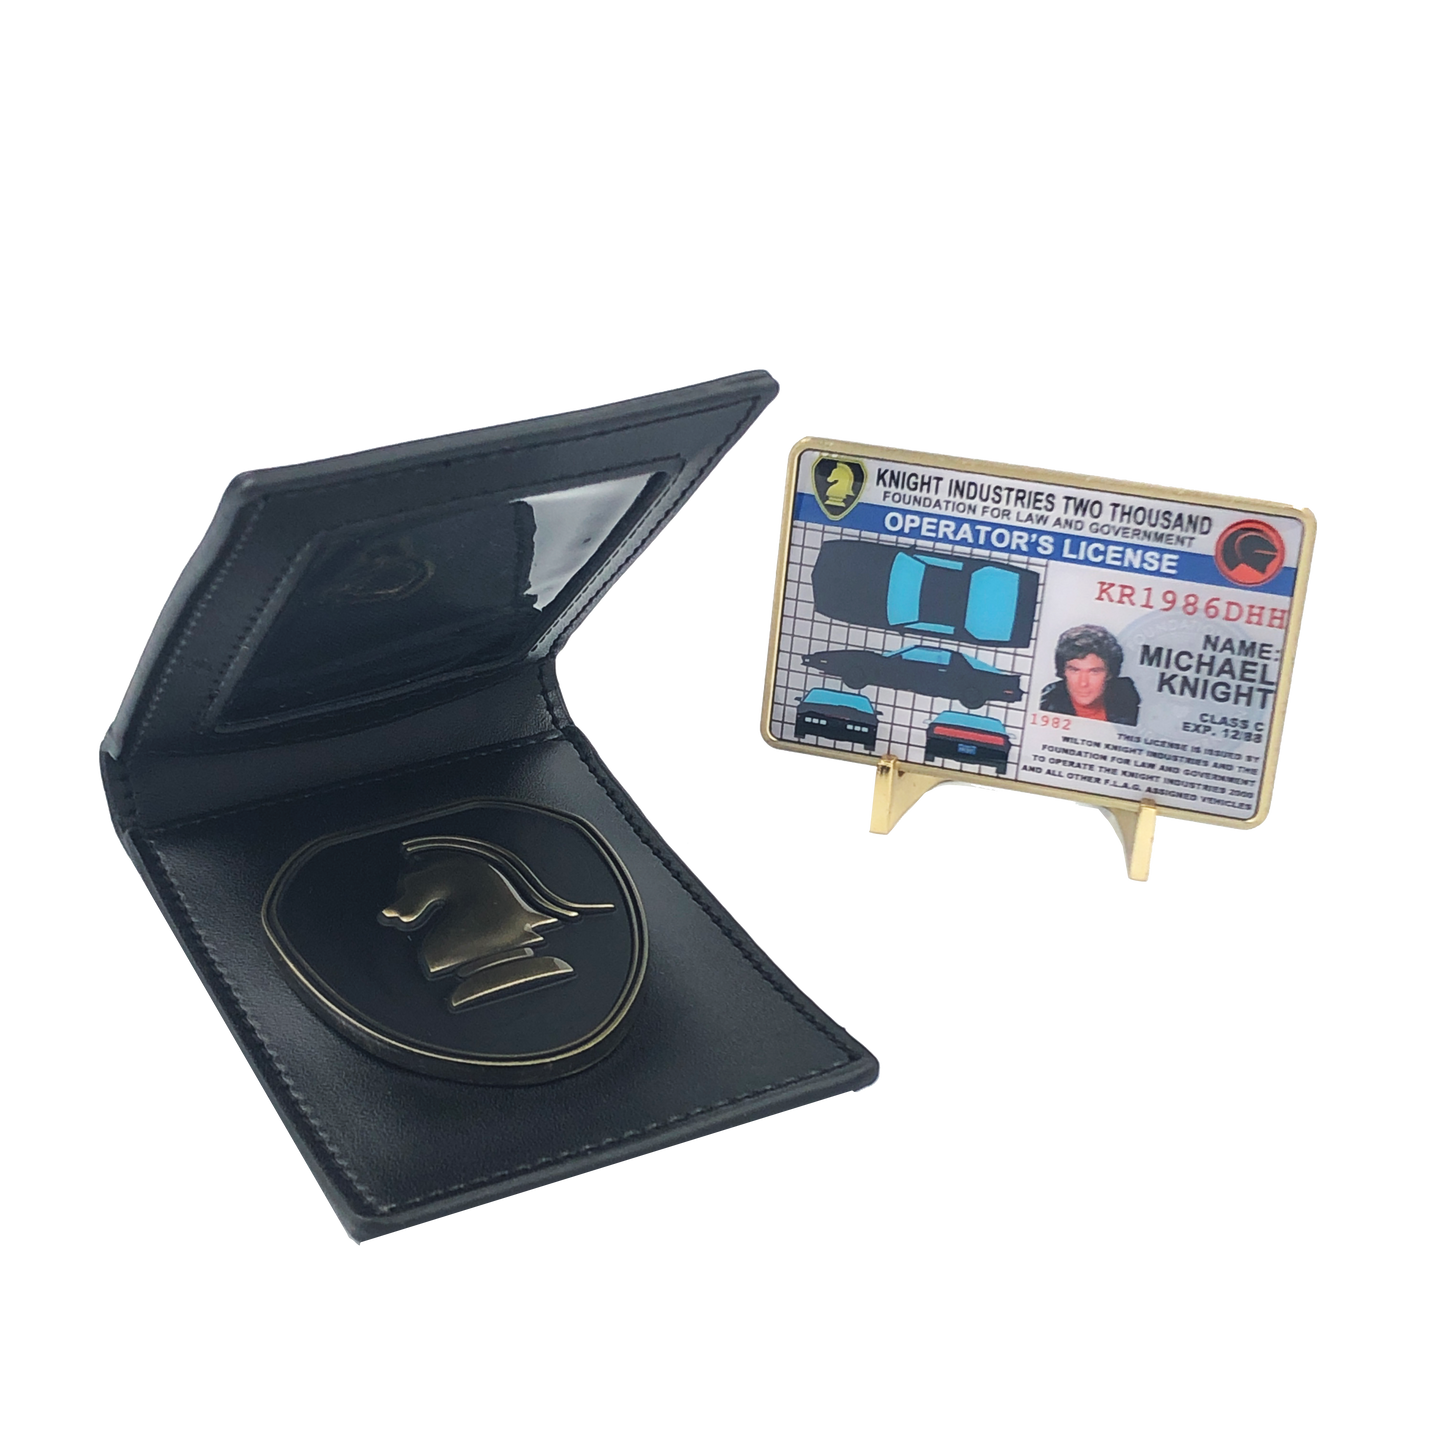 CL-HH Knight Rider in leather wallet with KITT Operator License on Metal Card (challenge coin)